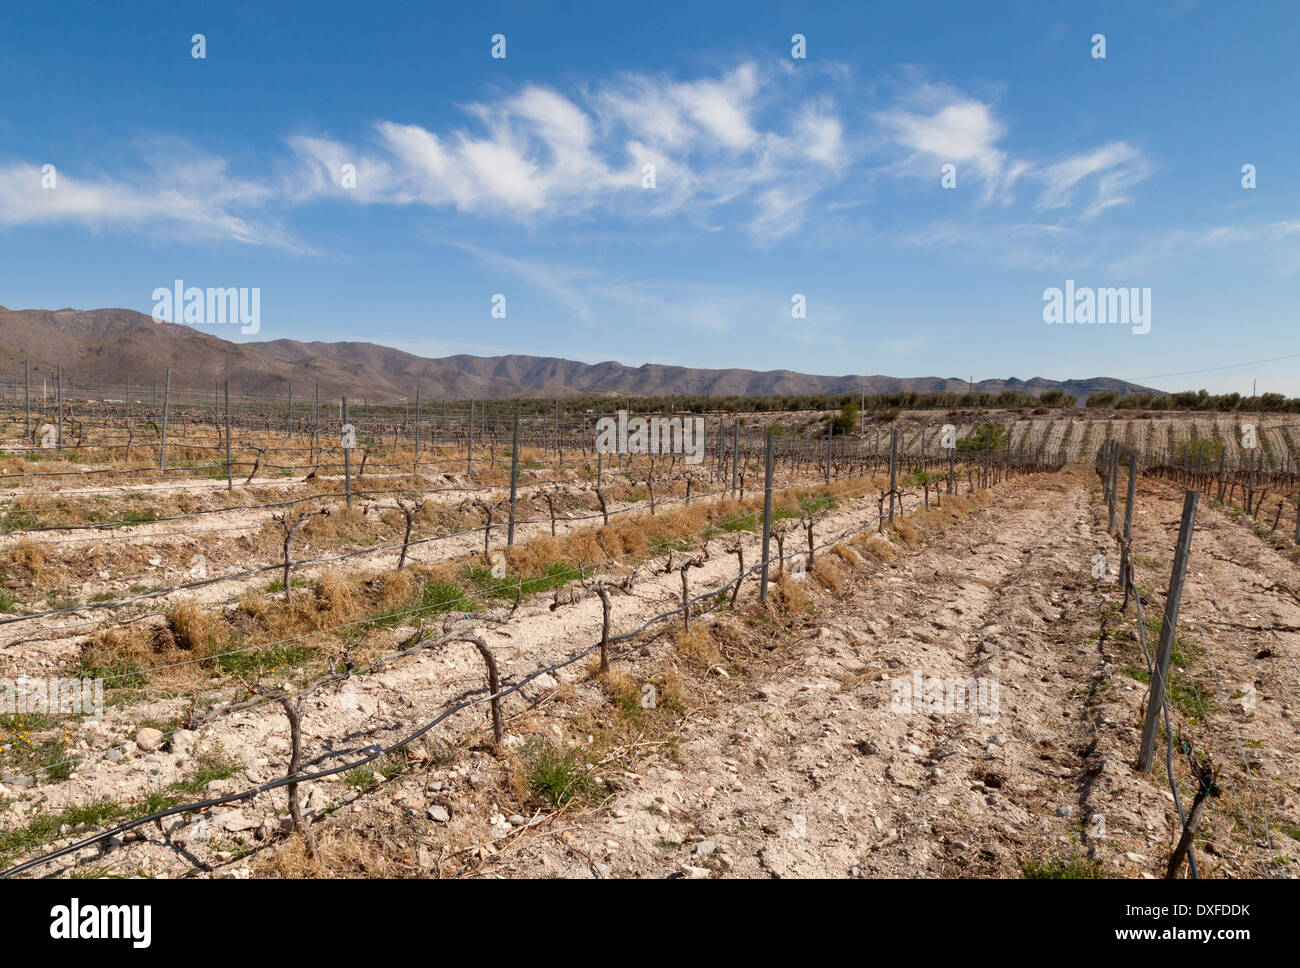 Grapevines growing in the Perfer vineyard, producing spanish wine, Almeria, Andalusia, Spain Europe Stock Photo